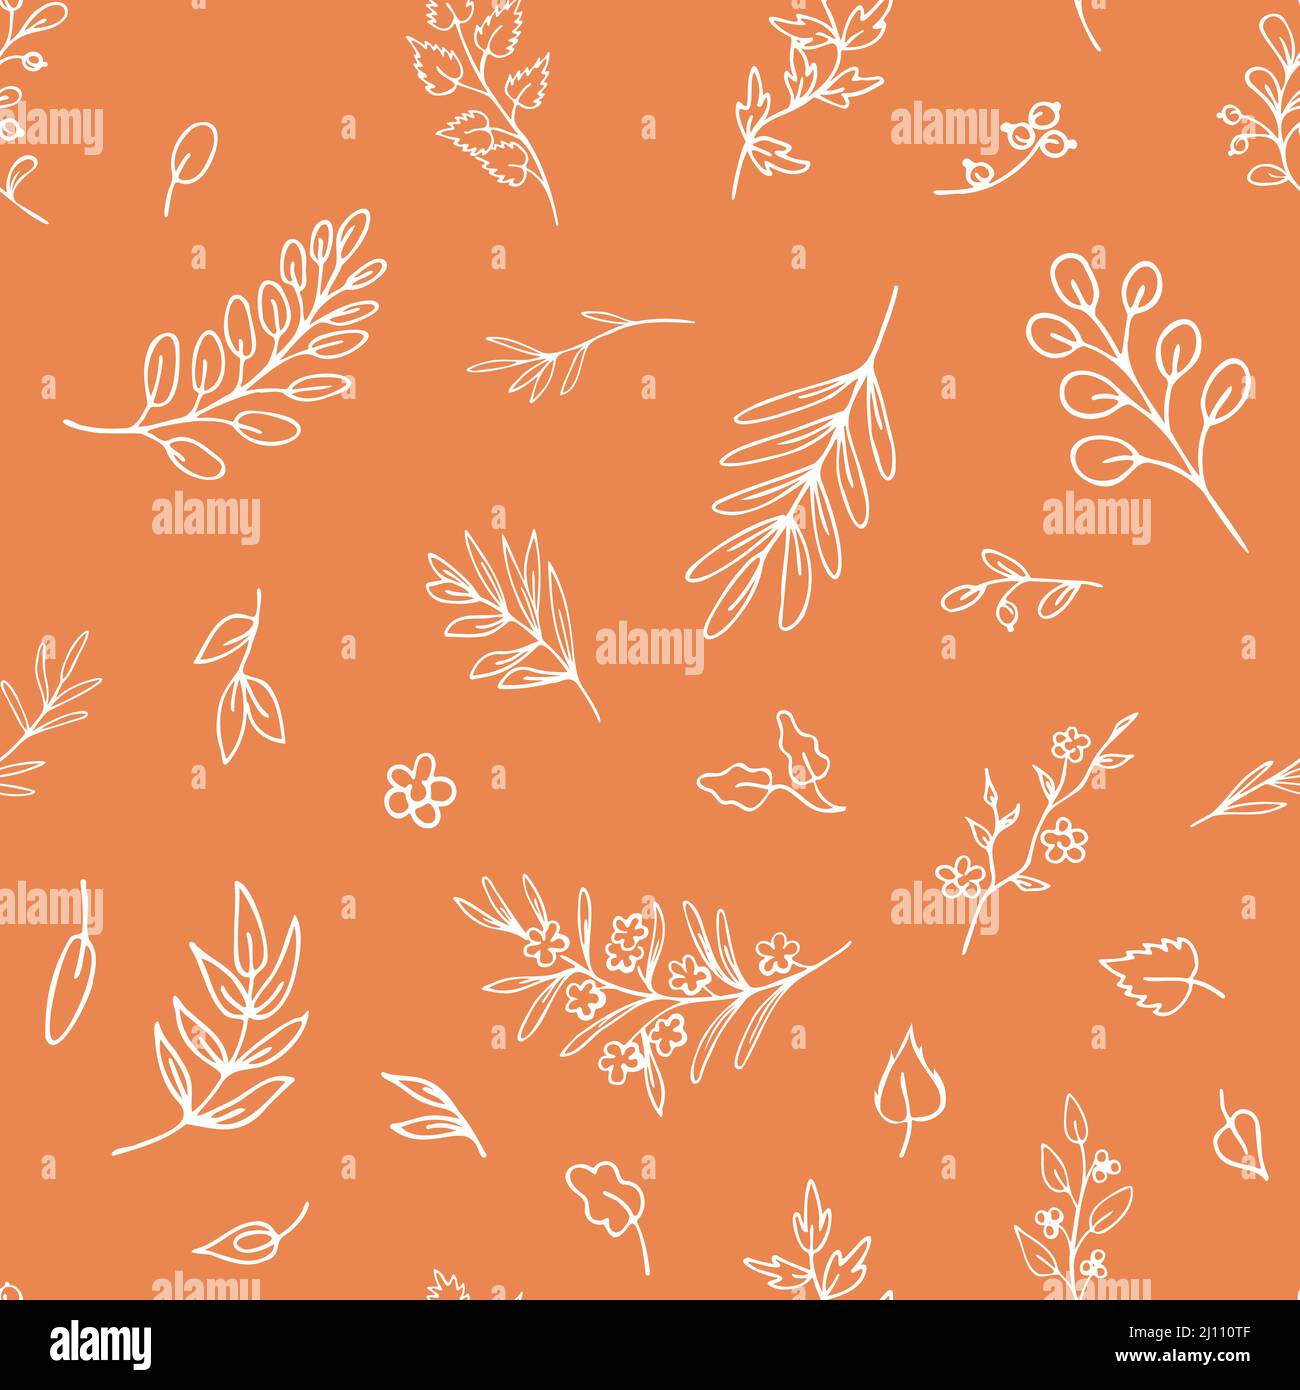 Seamless pattern made of white hand drawn leaves, branches, wild herbs on light orange background. Delicate contour sketch, botanical design for print Stock Vector